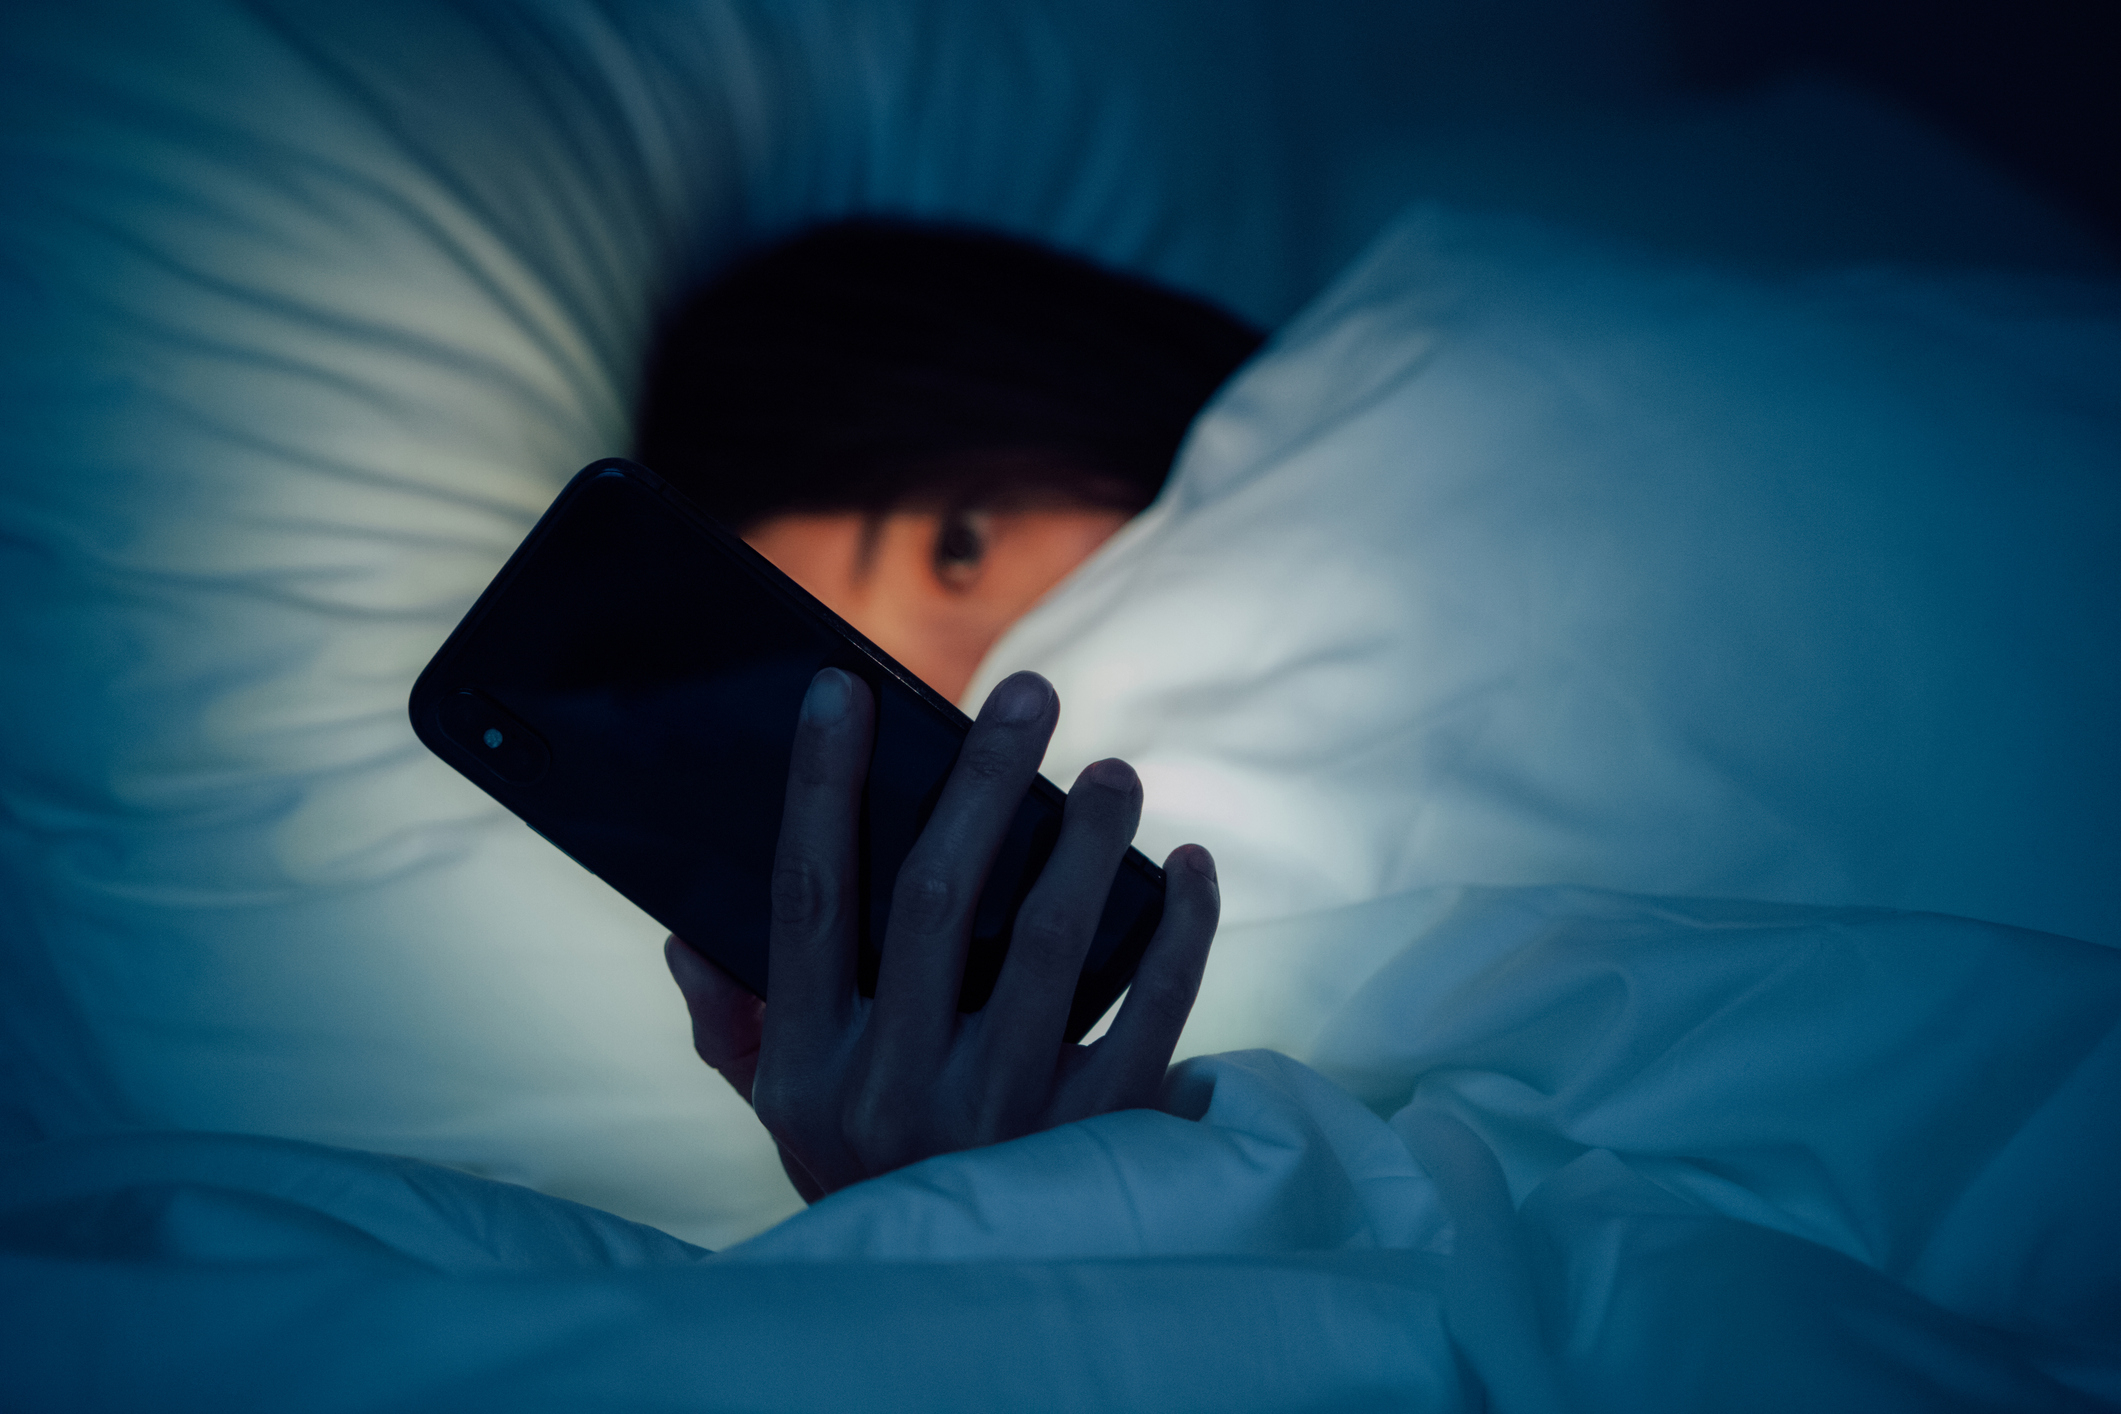 A woman peering out from under her covers in bed to look at her phone screen, which is illuminating her face in a swath of light from the screen